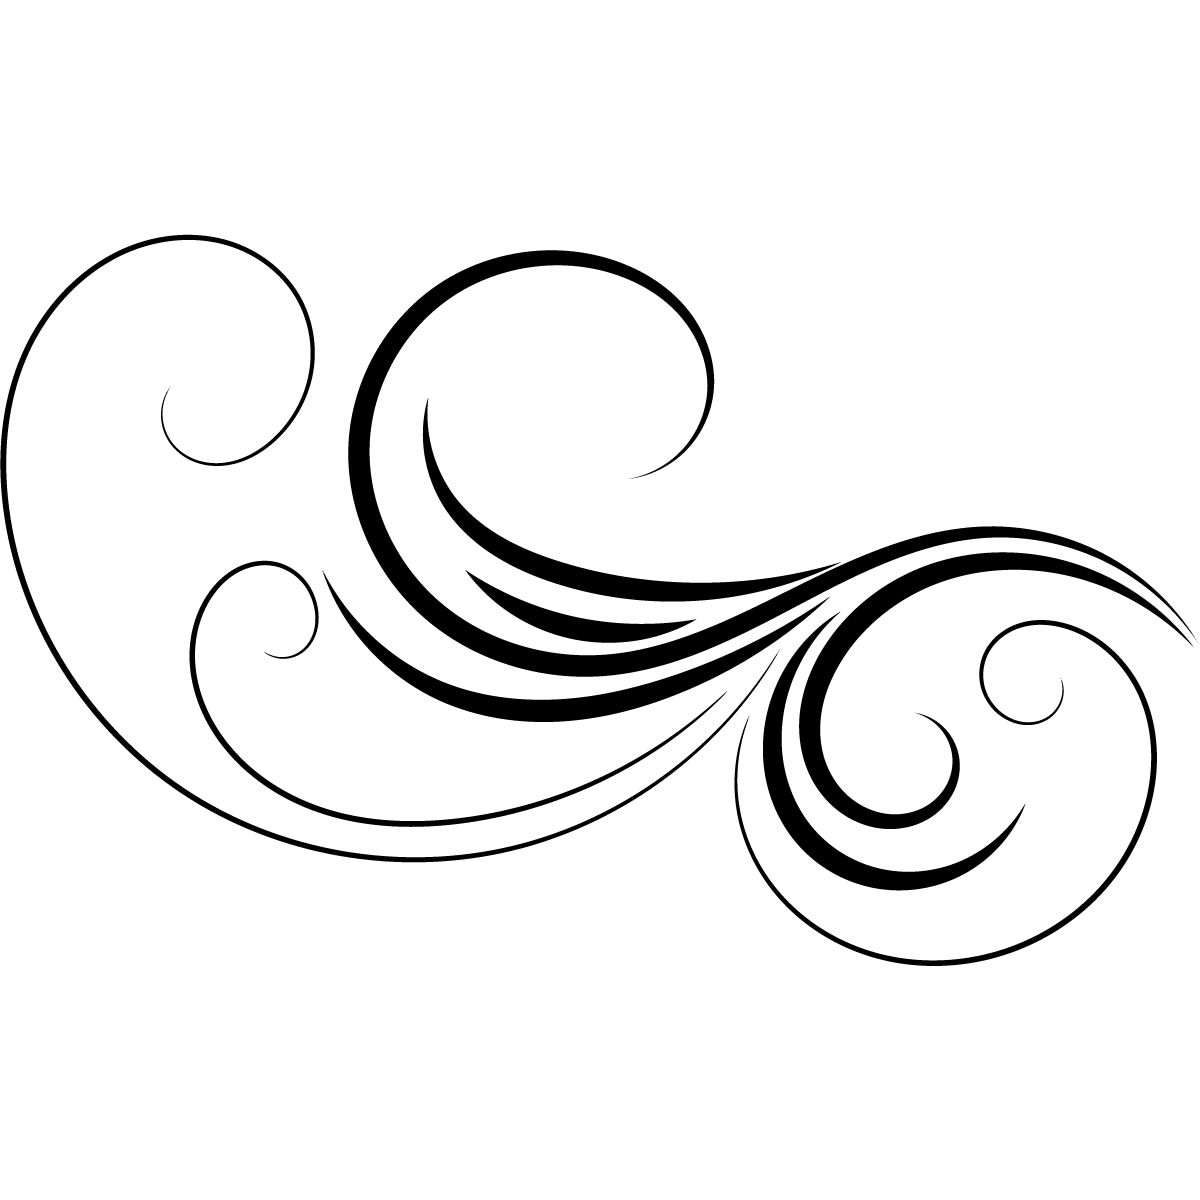 30 Wave Line Drawing Free Cliparts That You Can Download To You    